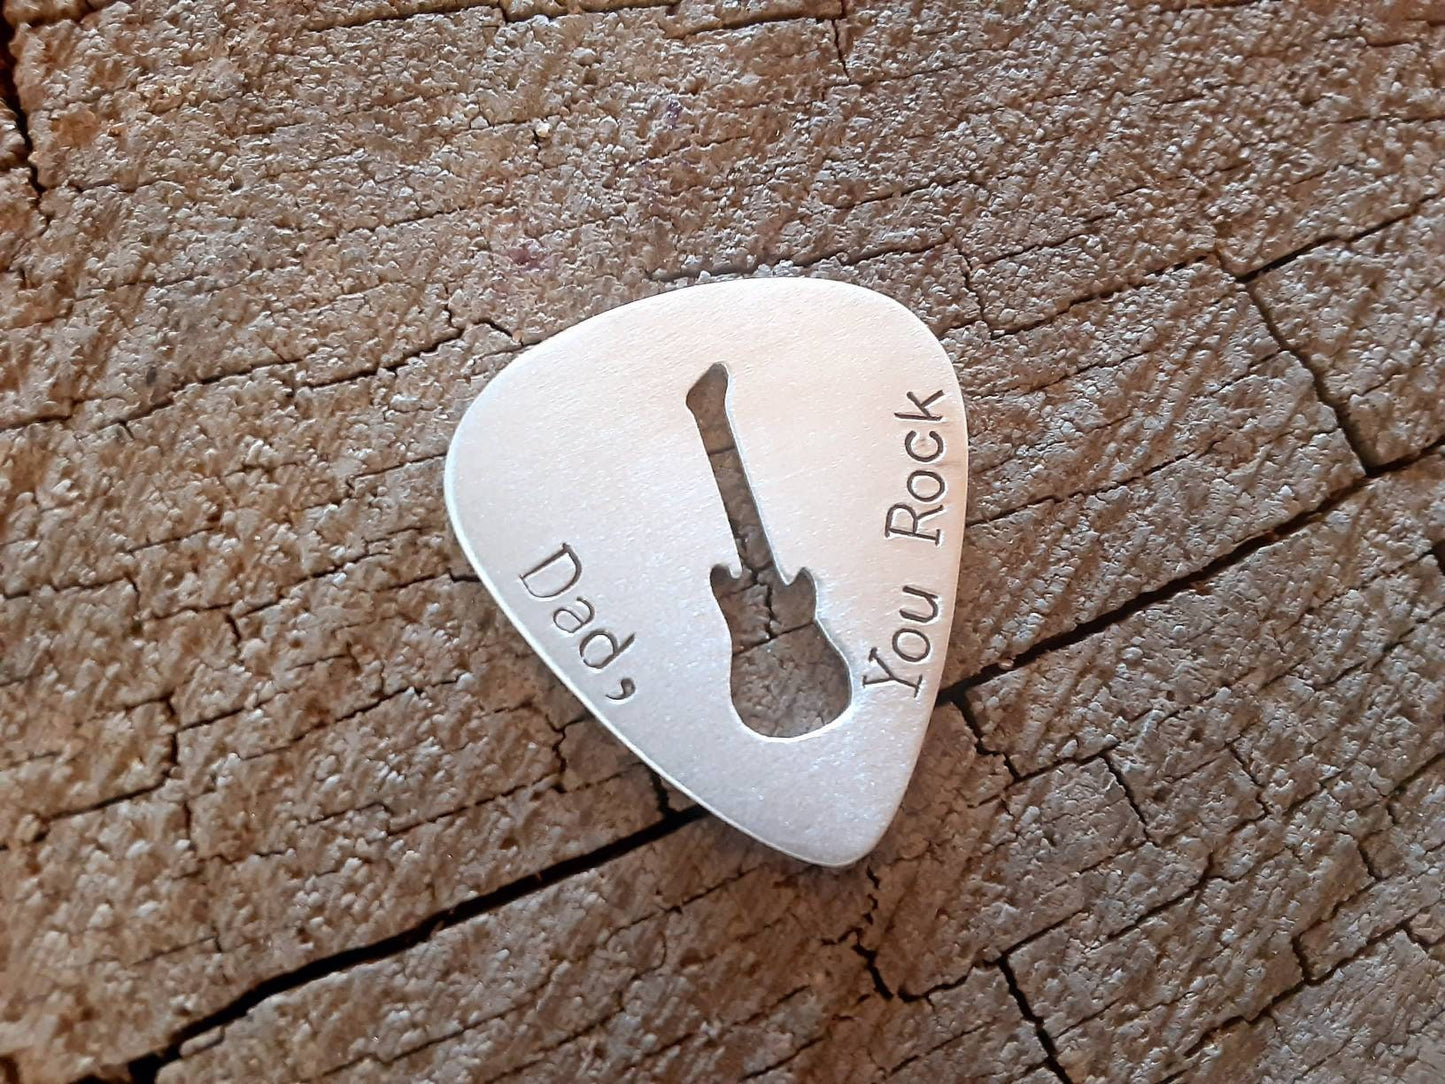 Aluminum guitar pick for dad with guitar cut out for Father's Day or playing guitar